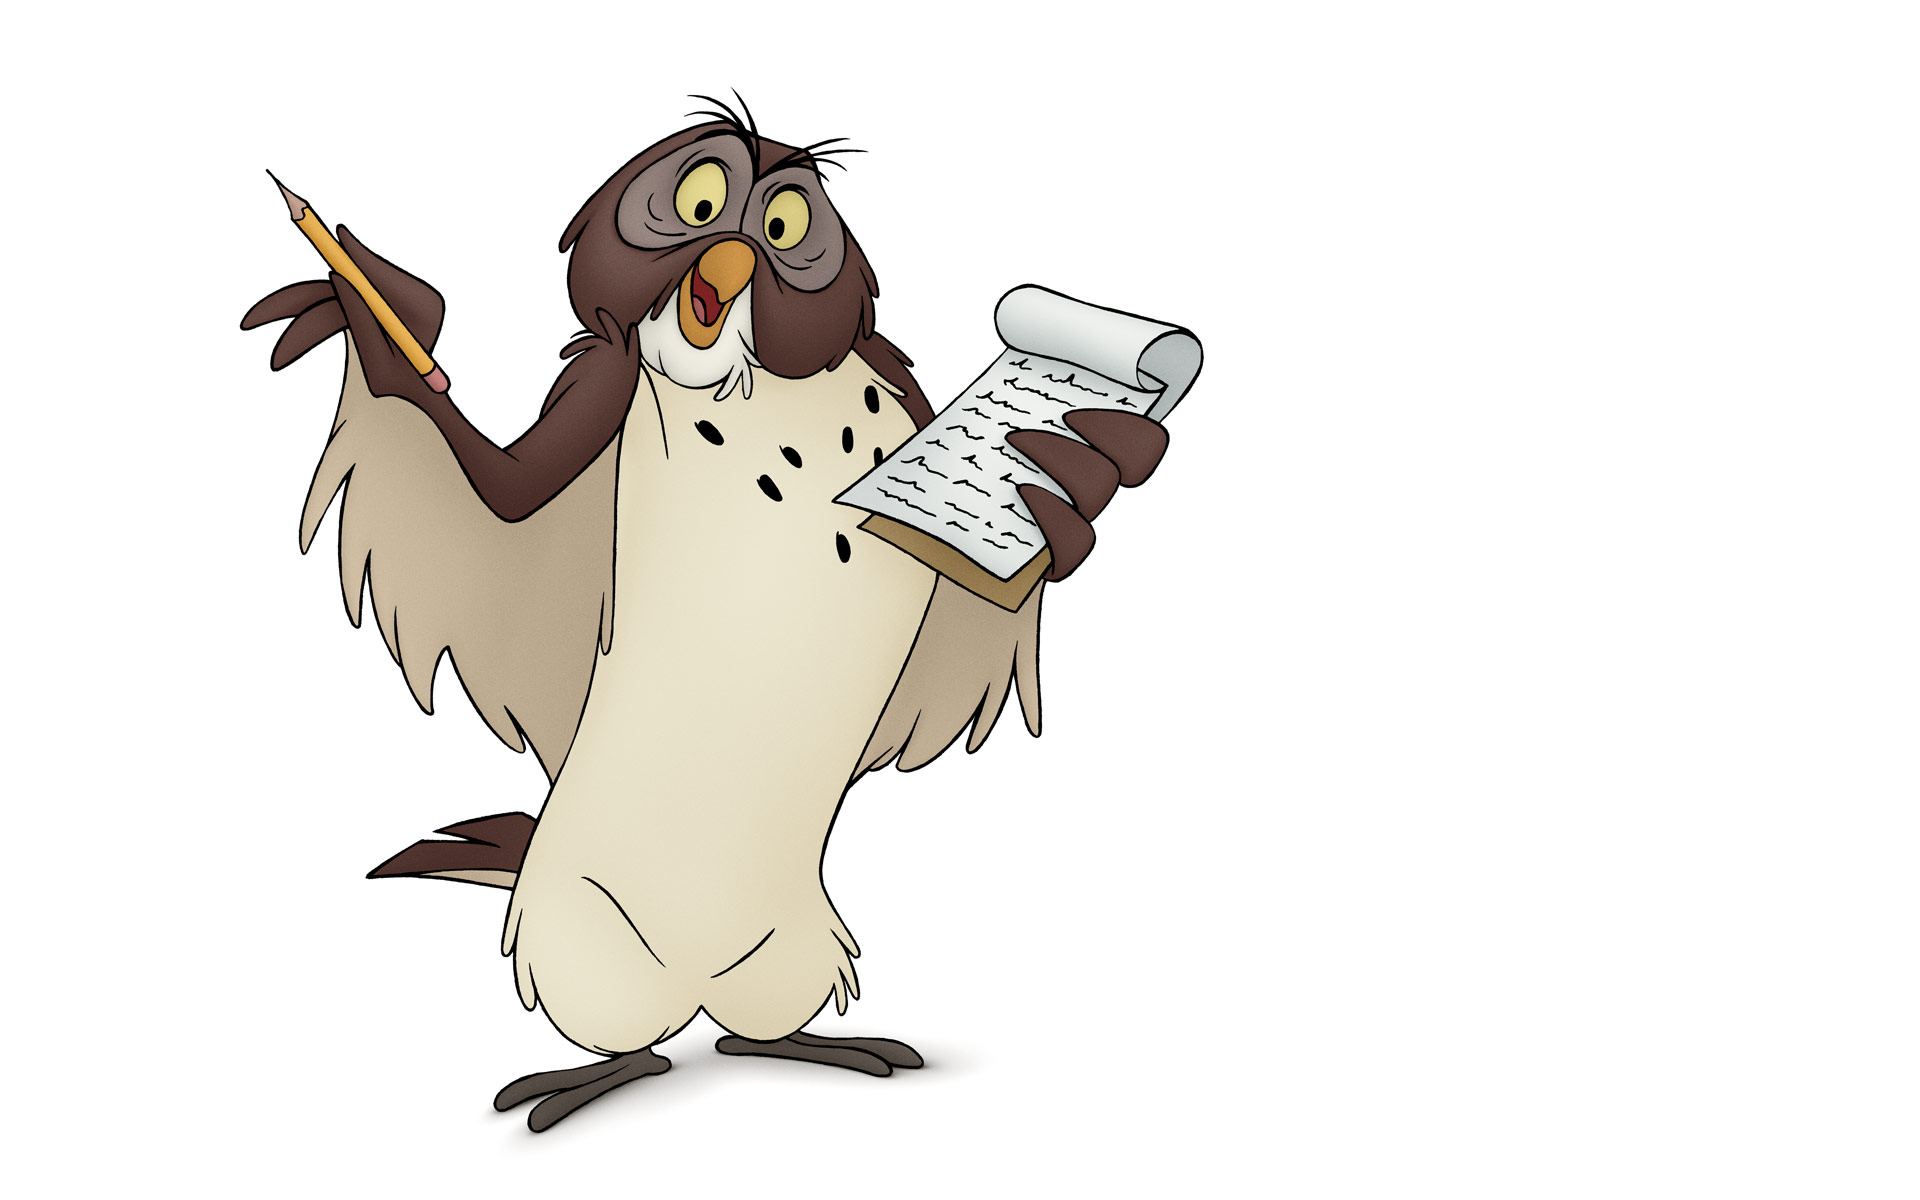 Owl From Winnie The Pooh Wallpaper - Winnie The Pooh Characters , HD Wallpaper & Backgrounds